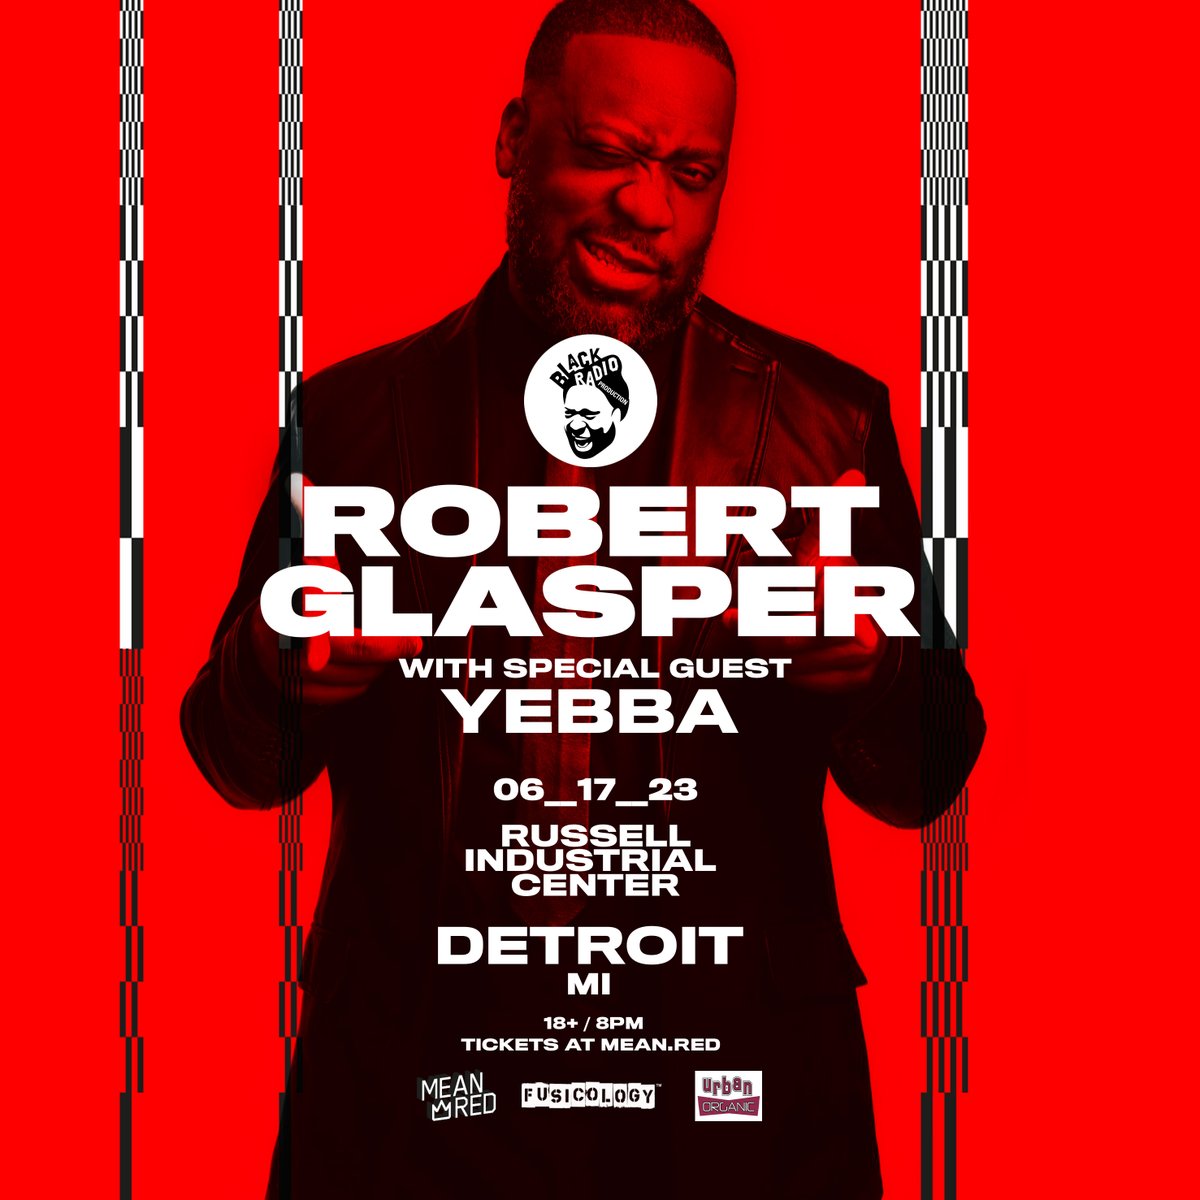 Multi Grammy winner @robertglasper comes to Detroit to the most unique independent venue in the city, Bringing with him special guest @YebbaDebba ! Tickets here:: mean.red